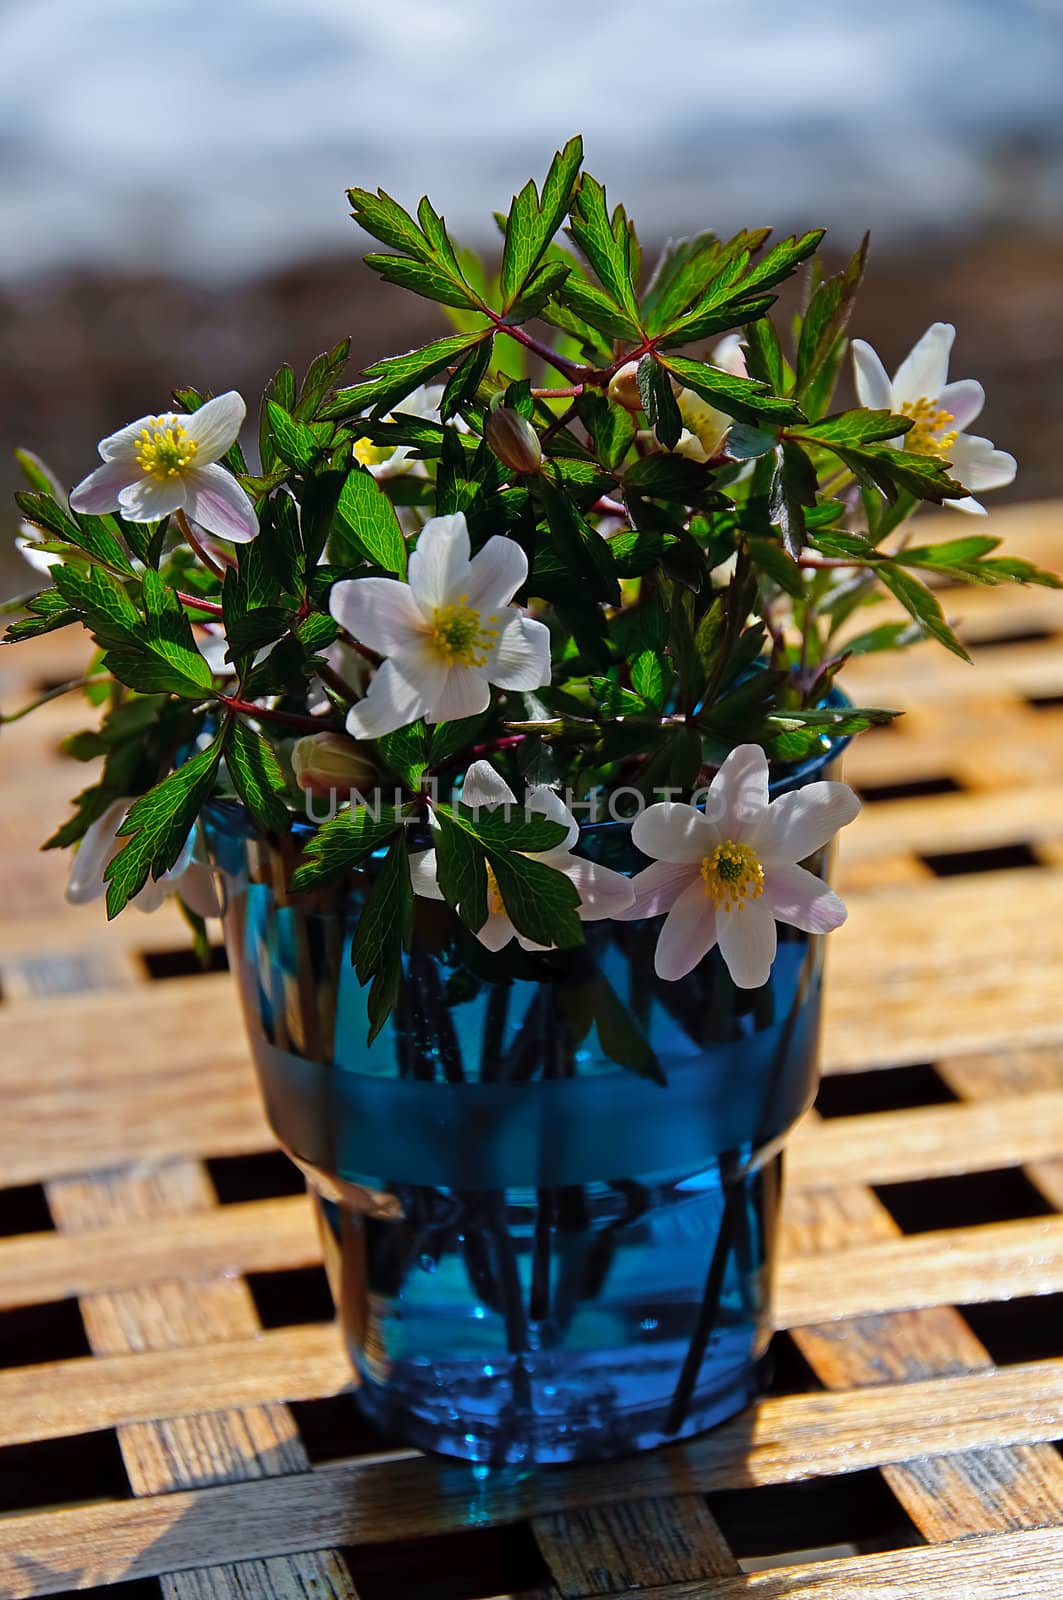 A bouquet of wood anemones in a blue glass